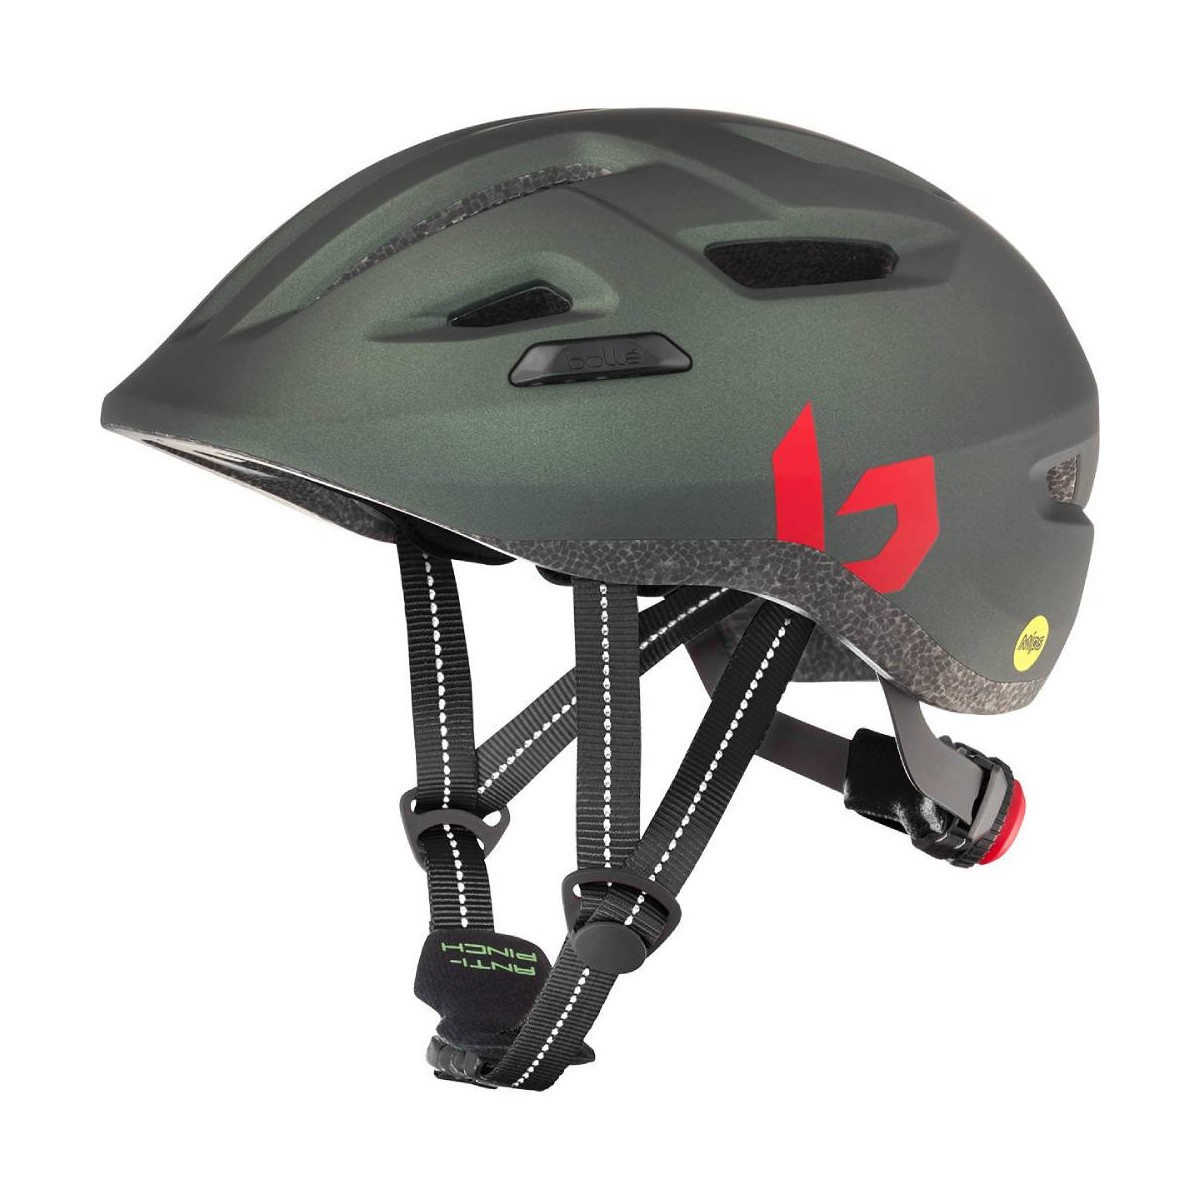 CASCO BOLLE STANCE JR MIPS (FOREST MATE)